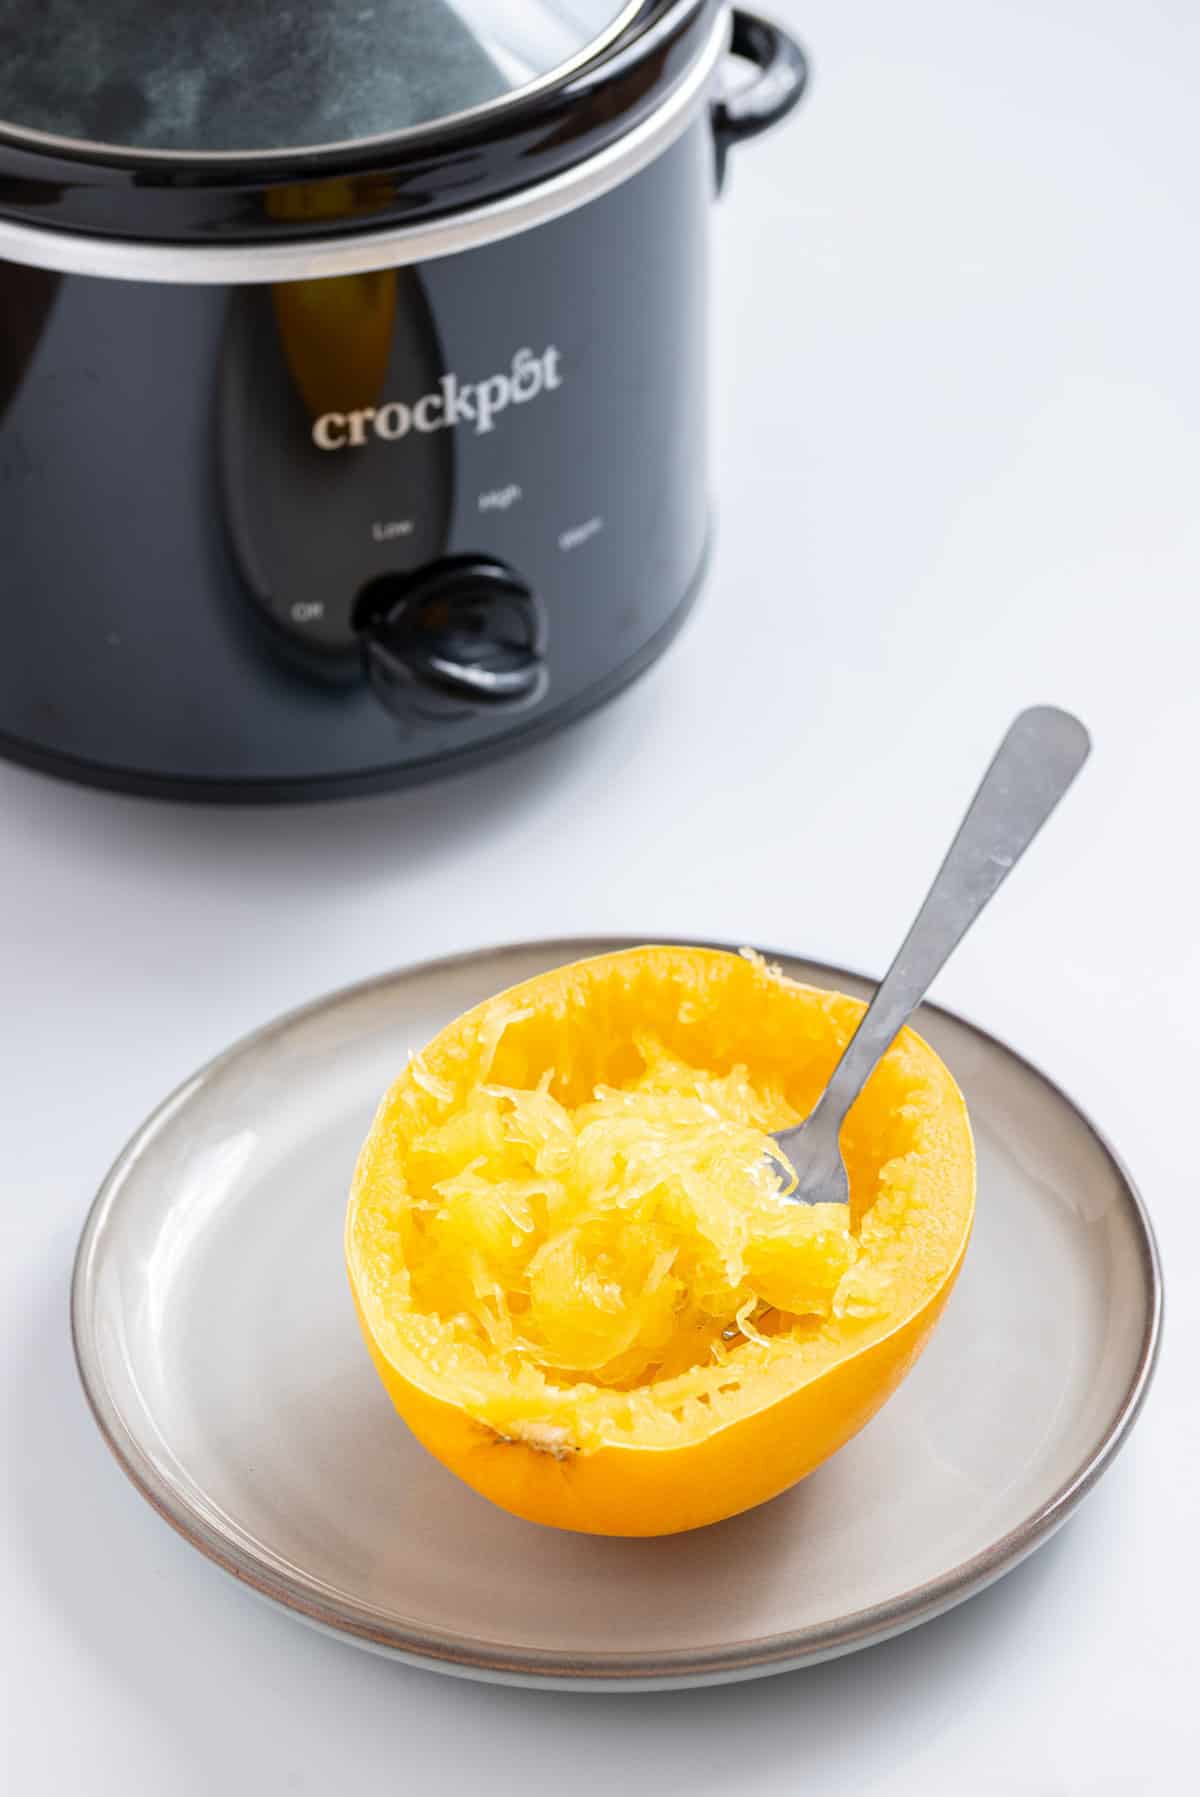 An image of cooked spaghetti squash with strands scraped with a fork and an instant pot behind it.